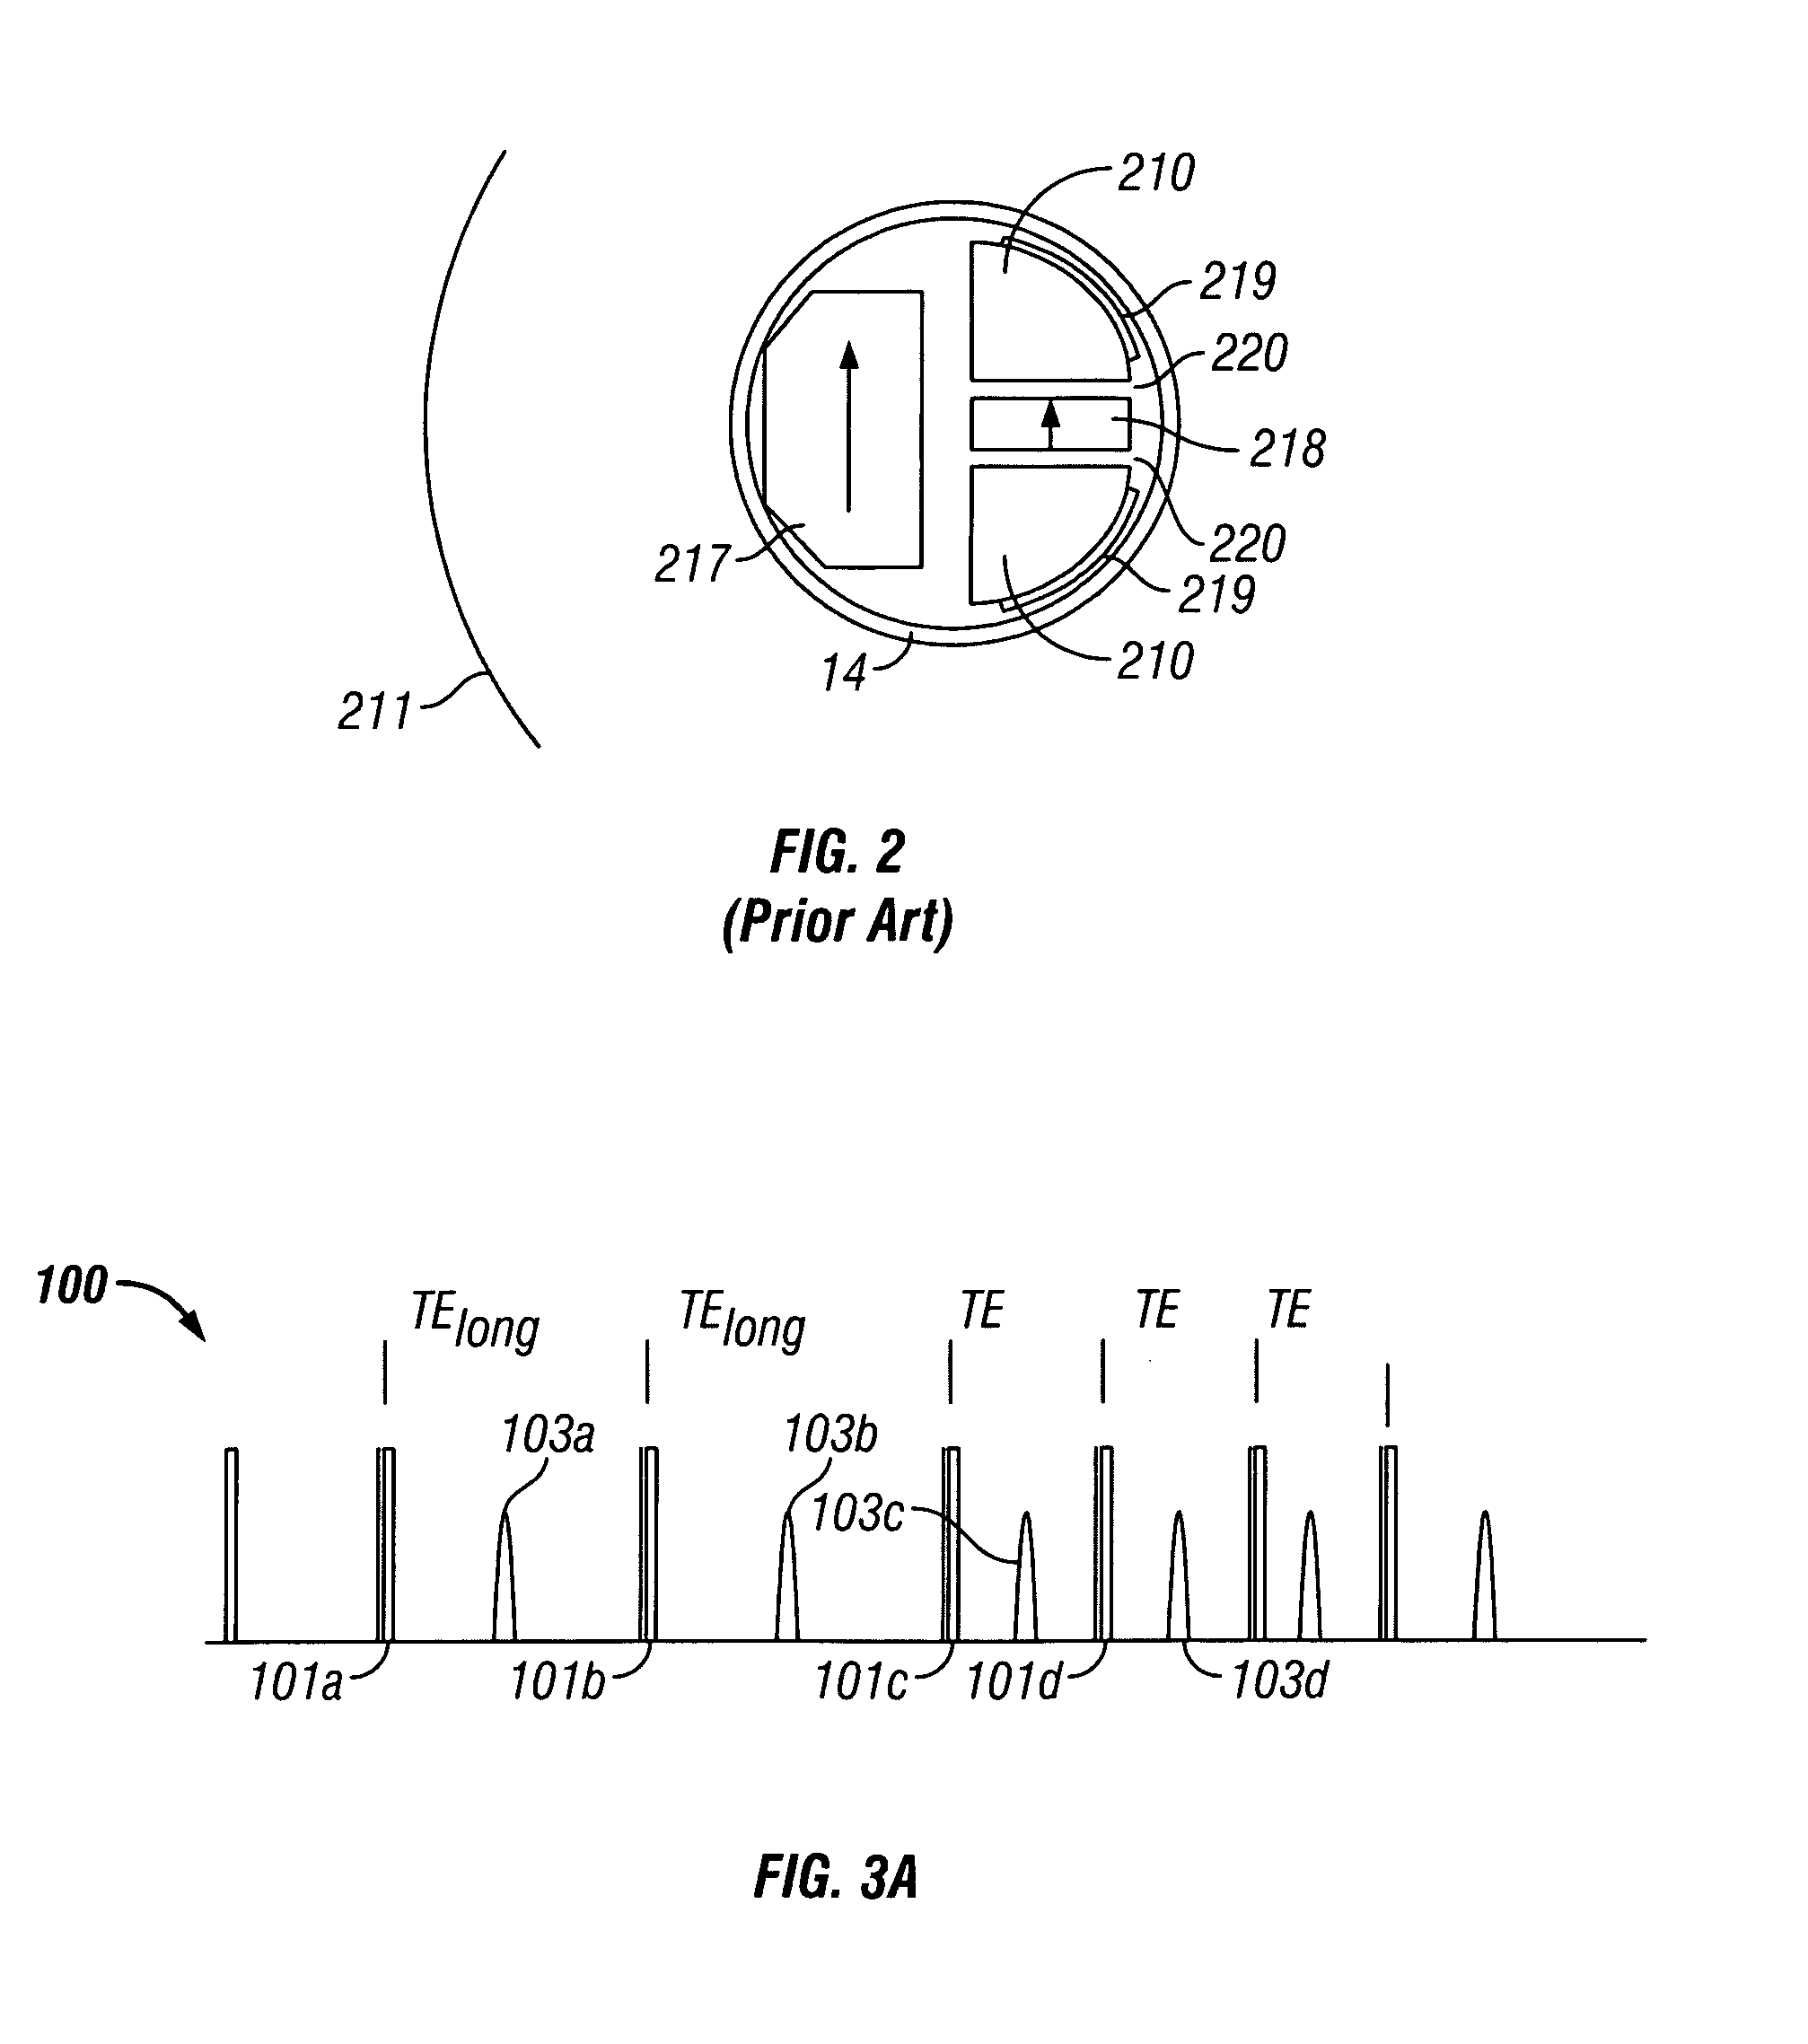 Method and apparatus for multi-frequency NMR diffusion measurements in the presence of internal magnetic field gradients